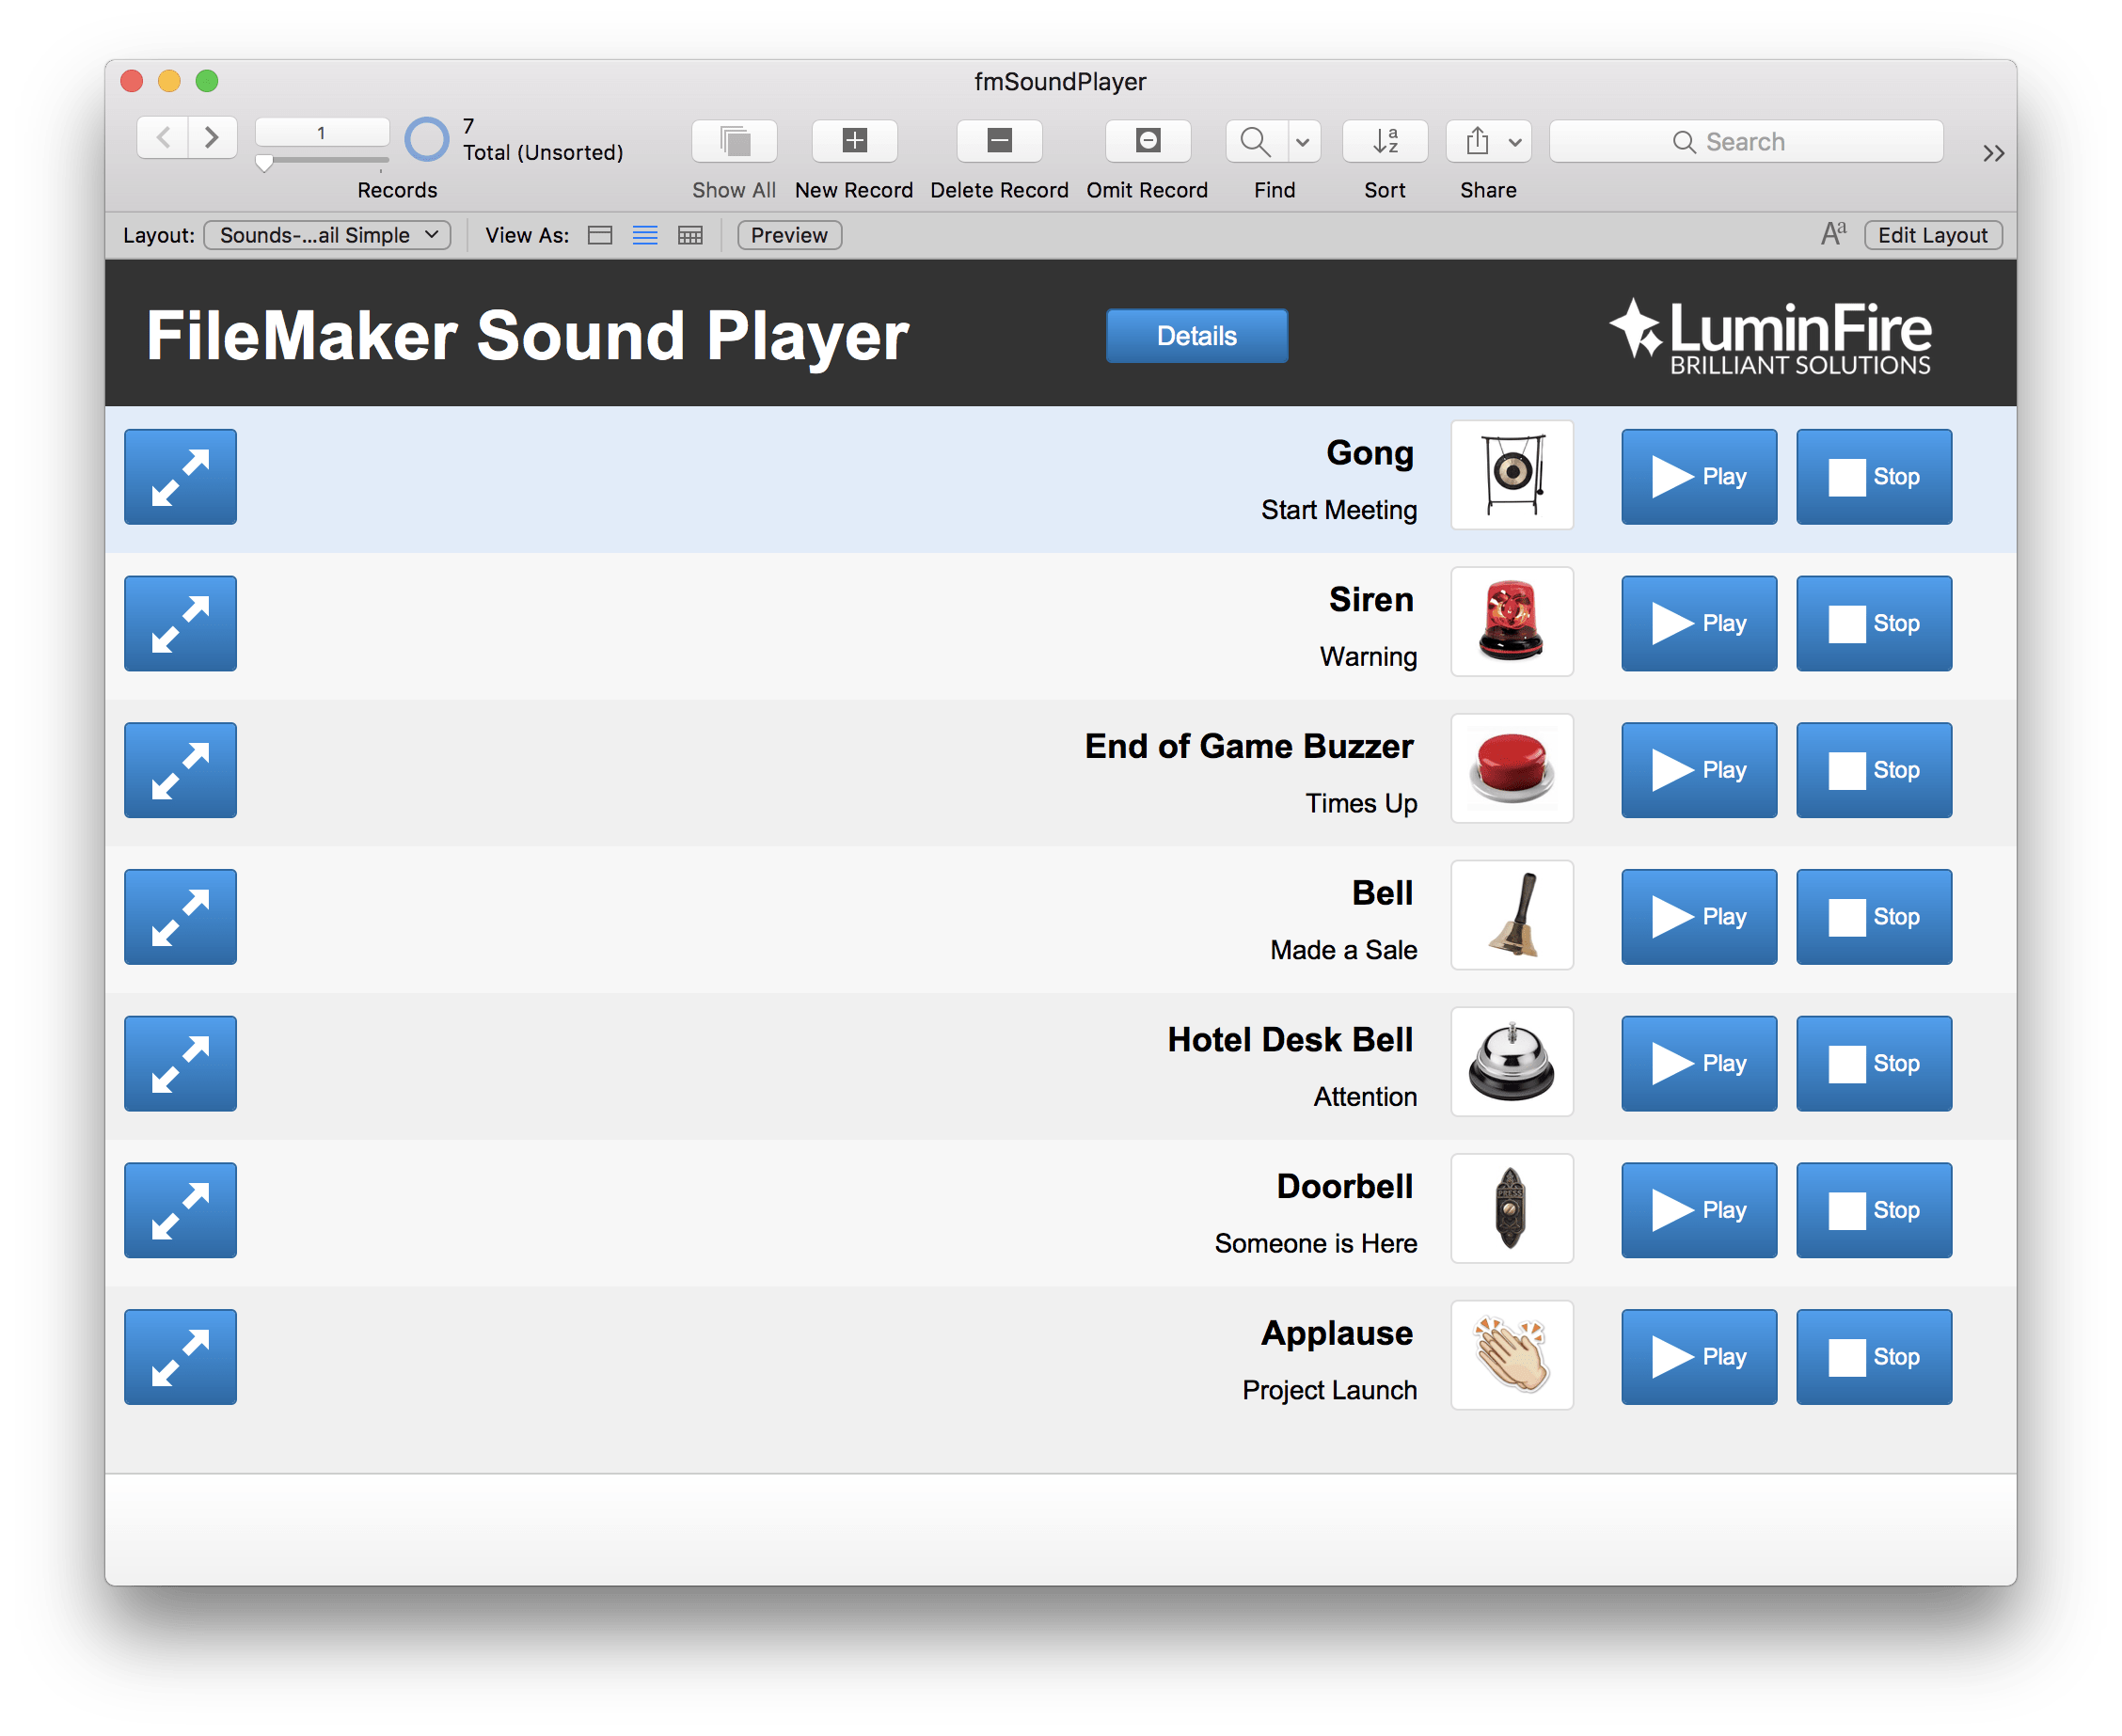 fmSoundPlayer Sound Effects on the Fly with FileMaker 8